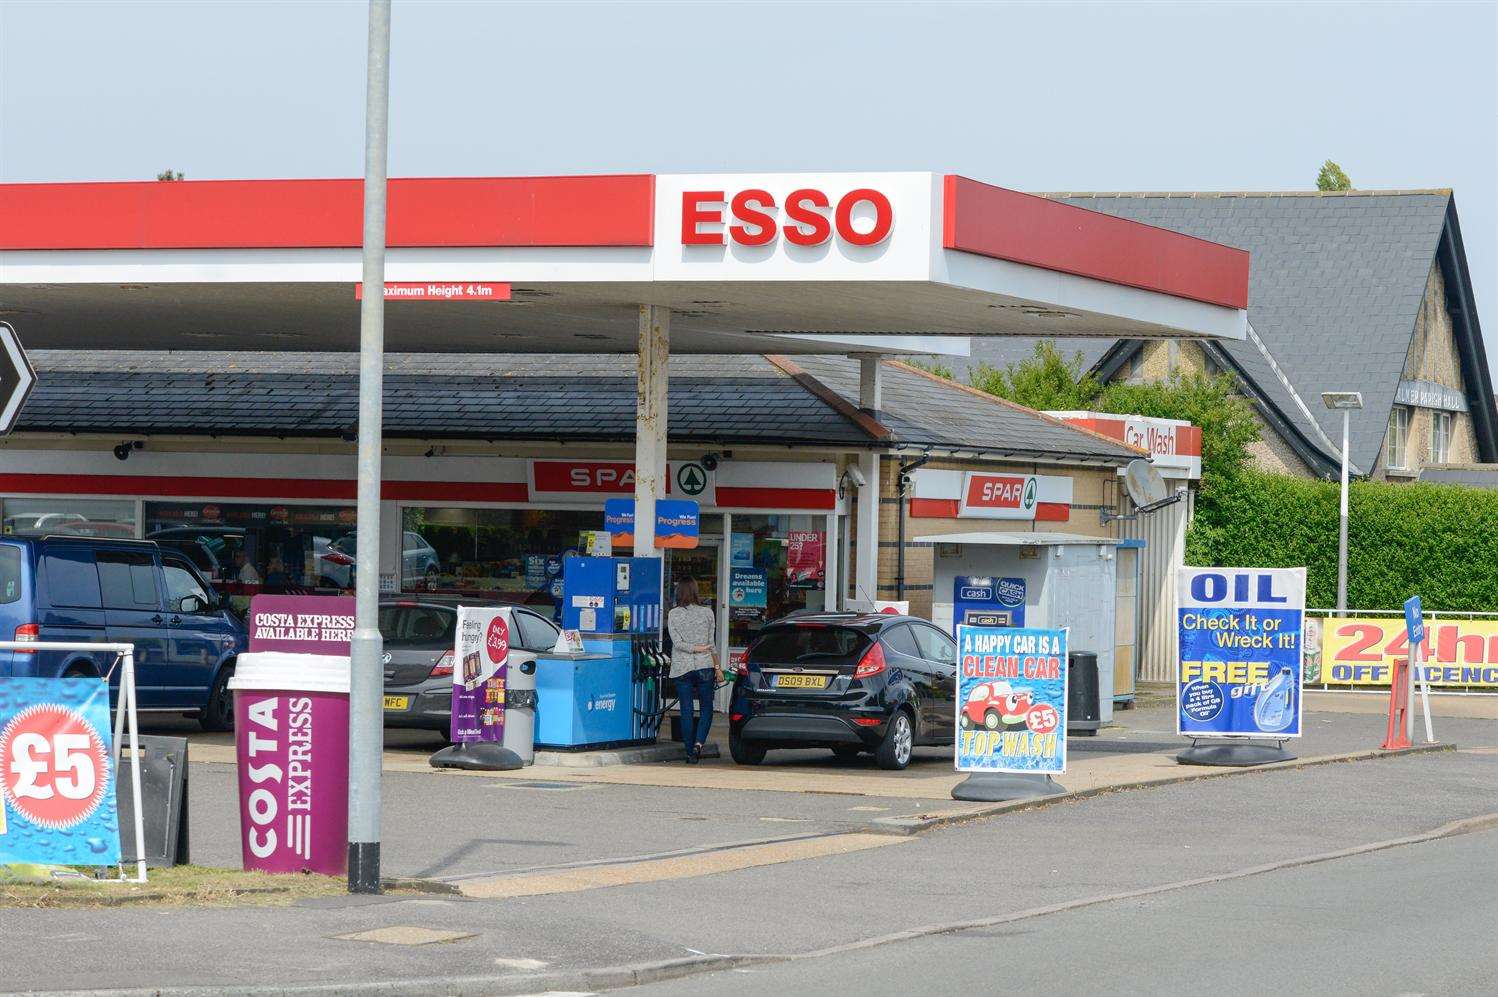 The Esso branch in Old Road West, Gravesend was the first to sell unleaded fuel below 120p per litre. Stock image